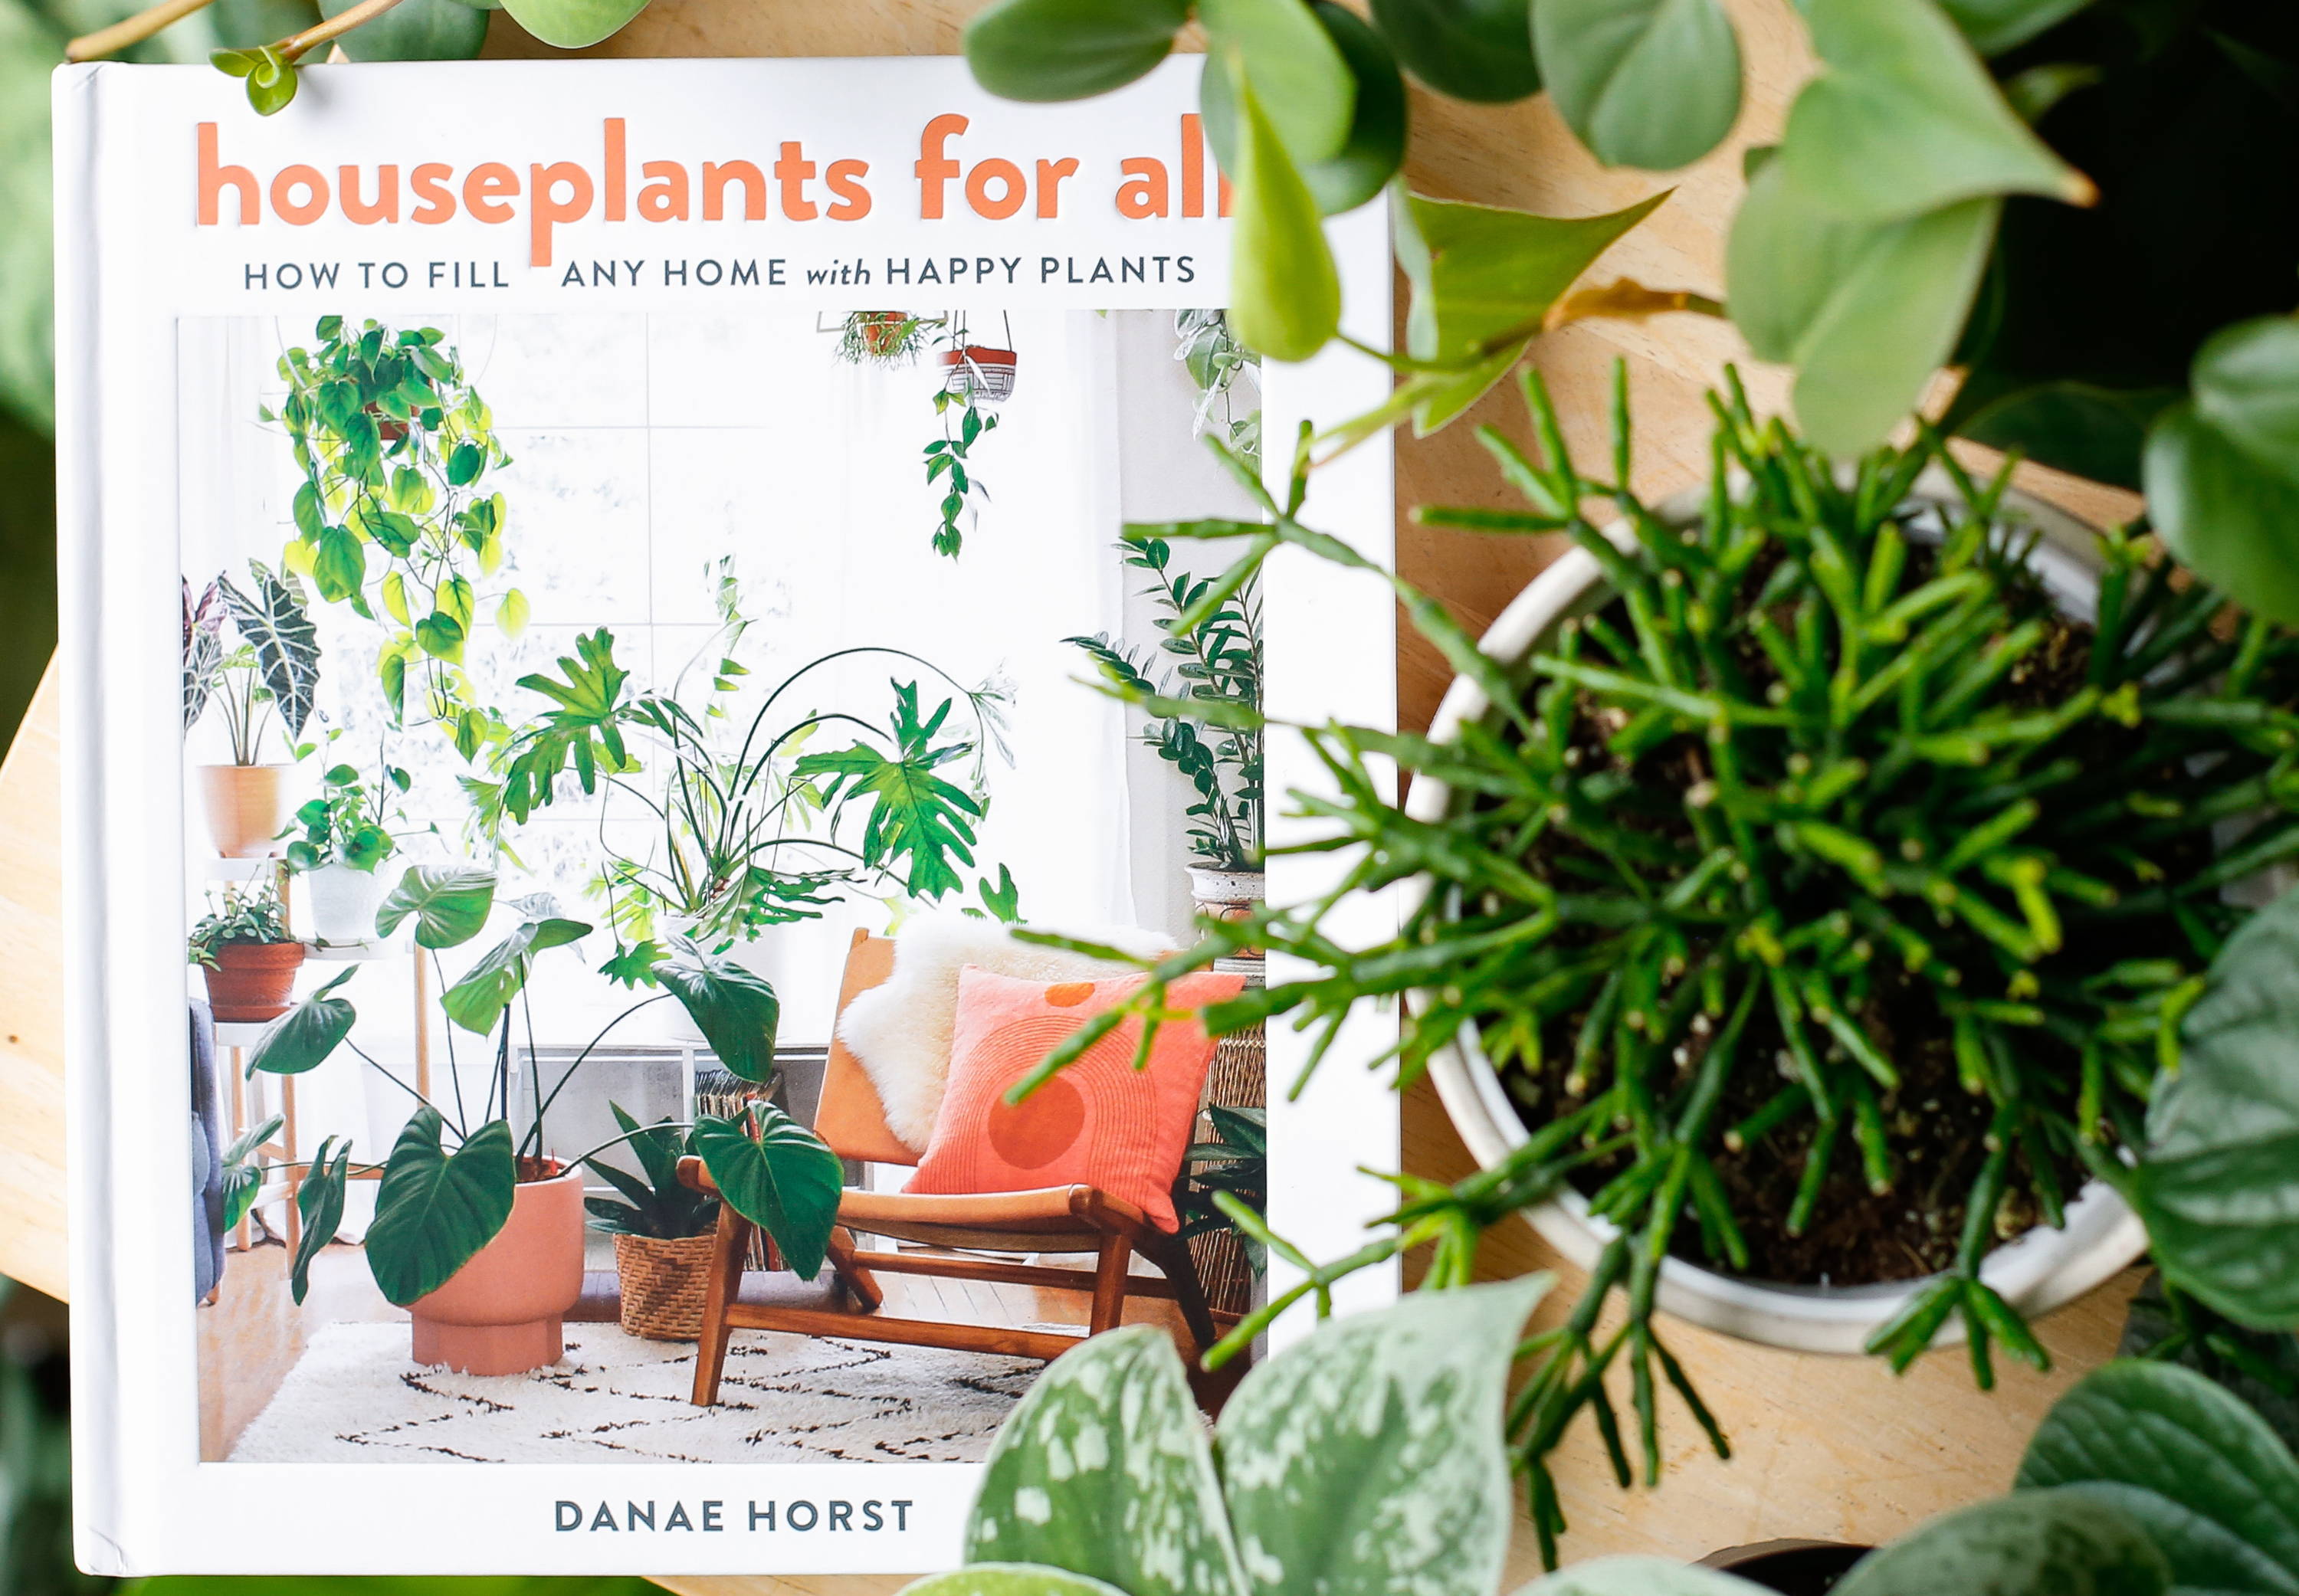 The book Houseplants For All, lying on a table surrounded by plants- viewed from above